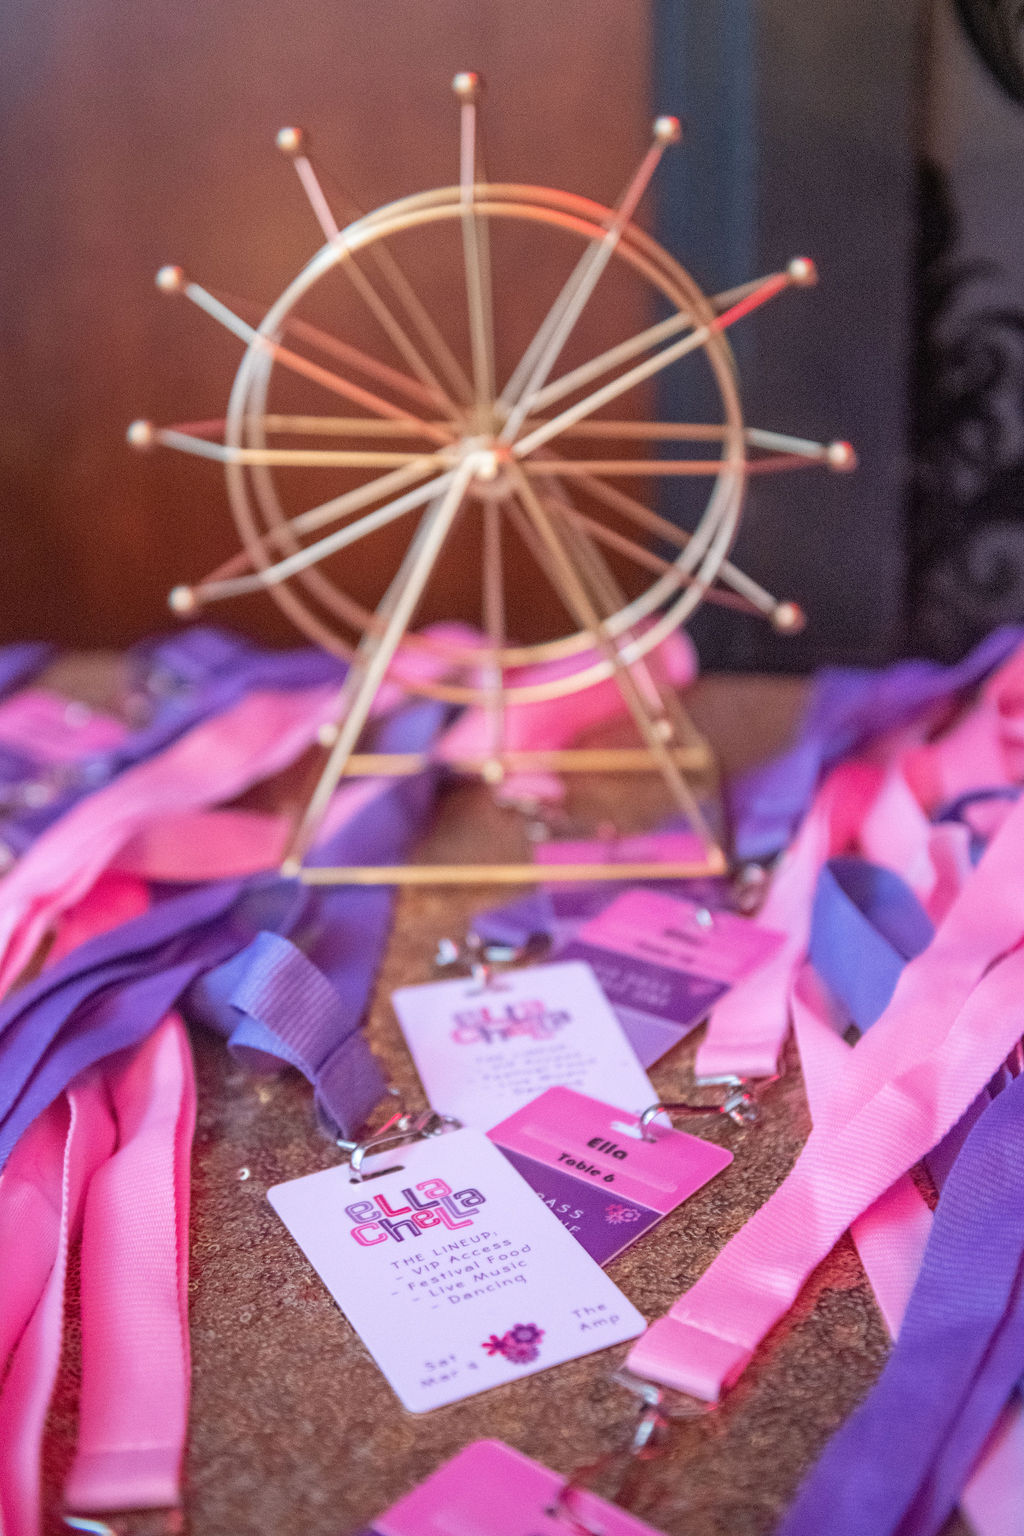 VIP passes and custom lanyards at Ella Chella Coachella-inspired Bat Mitzvah Party at AMP in Bethesda, MD | Pop Color Events | Adding a Pop of Color to Bar & Bat Mitzvahs in DC, MD & VA | Photo by: Fillman Photo